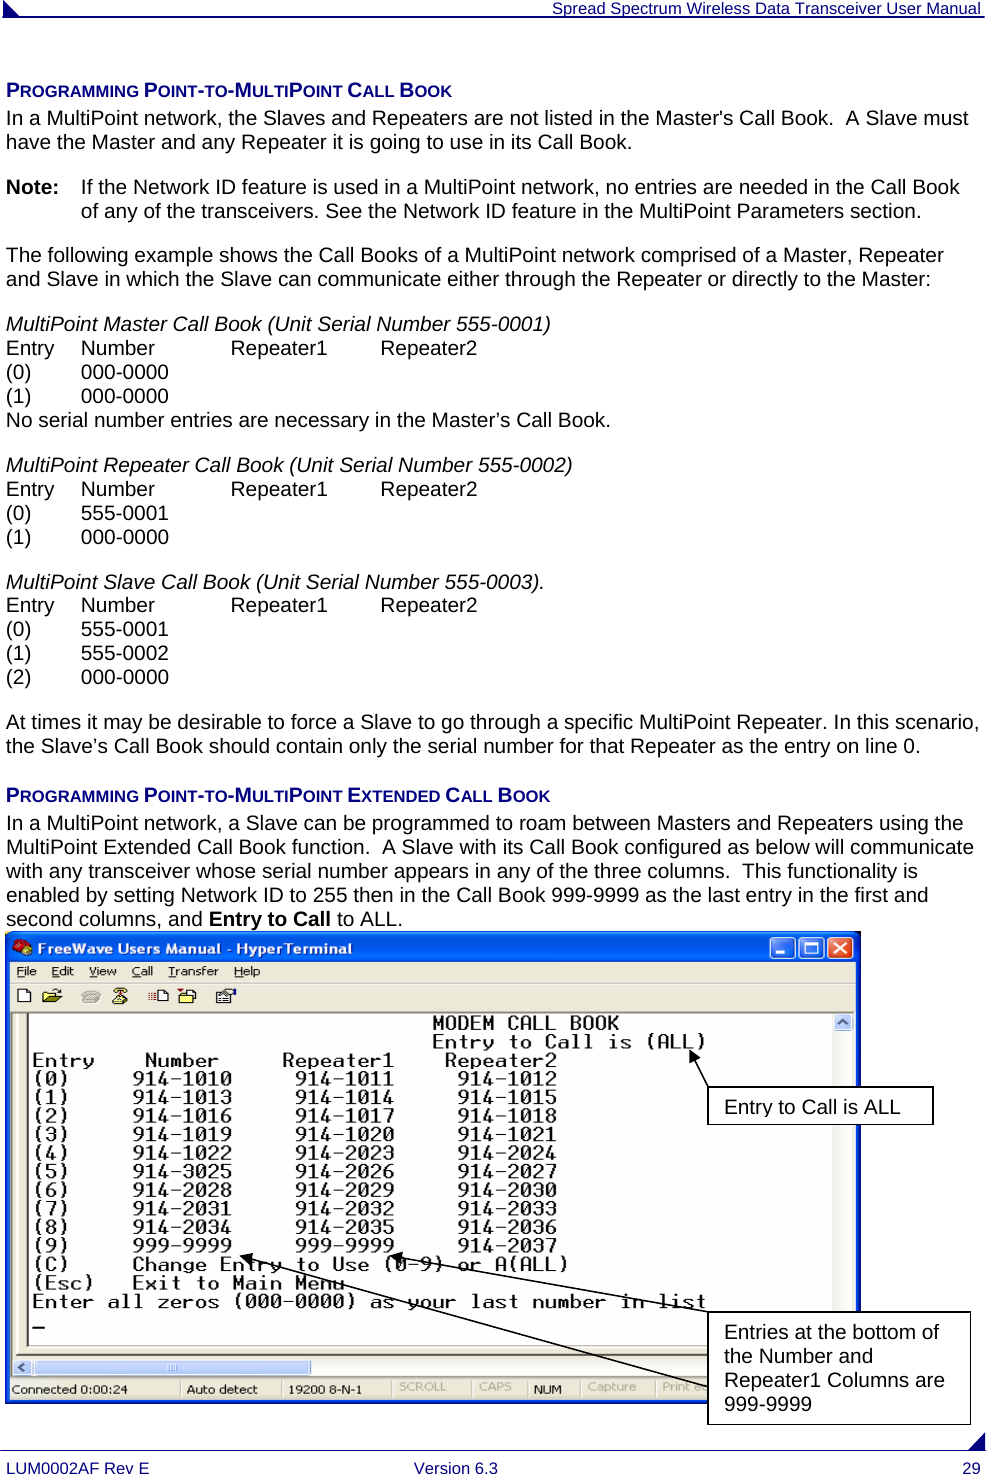  Spread Spectrum Wireless Data Transceiver User Manual LUM0002AF Rev E  Version 6.3  29 PROGRAMMING POINT-TO-MULTIPOINT CALL BOOK  In a MultiPoint network, the Slaves and Repeaters are not listed in the Master&apos;s Call Book.  A Slave must have the Master and any Repeater it is going to use in its Call Book.   Note:   If the Network ID feature is used in a MultiPoint network, no entries are needed in the Call Book of any of the transceivers. See the Network ID feature in the MultiPoint Parameters section. The following example shows the Call Books of a MultiPoint network comprised of a Master, Repeater and Slave in which the Slave can communicate either through the Repeater or directly to the Master: MultiPoint Master Call Book (Unit Serial Number 555-0001)                                                                   Entry   Number   Repeater1   Repeater2                                                                                          (0)  000-0000                                                                                                                                        (1)   000-0000                                                                                                                                        No serial number entries are necessary in the Master’s Call Book.  MultiPoint Repeater Call Book (Unit Serial Number 555-0002)                                                                       Entry   Number   Repeater1   Repeater2                                                                                   (0)   555-0001                                                                                                                                        (1)   000-0000 MultiPoint Slave Call Book (Unit Serial Number 555-0003).                                                                     Entry   Number   Repeater1   Repeater2                                                                                   (0)   555-0001                                                                                                                                         (1)   555-0002                                                                                                                                        (2)   000-0000 At times it may be desirable to force a Slave to go through a specific MultiPoint Repeater. In this scenario, the Slave’s Call Book should contain only the serial number for that Repeater as the entry on line 0. PROGRAMMING POINT-TO-MULTIPOINT EXTENDED CALL BOOK In a MultiPoint network, a Slave can be programmed to roam between Masters and Repeaters using the MultiPoint Extended Call Book function.  A Slave with its Call Book configured as below will communicate with any transceiver whose serial number appears in any of the three columns.  This functionality is enabled by setting Network ID to 255 then in the Call Book 999-9999 as the last entry in the first and second columns, and Entry to Call to ALL.  Entry to Call is ALLEntries at the bottom of the Number and Repeater1 Columns are 999-9999 